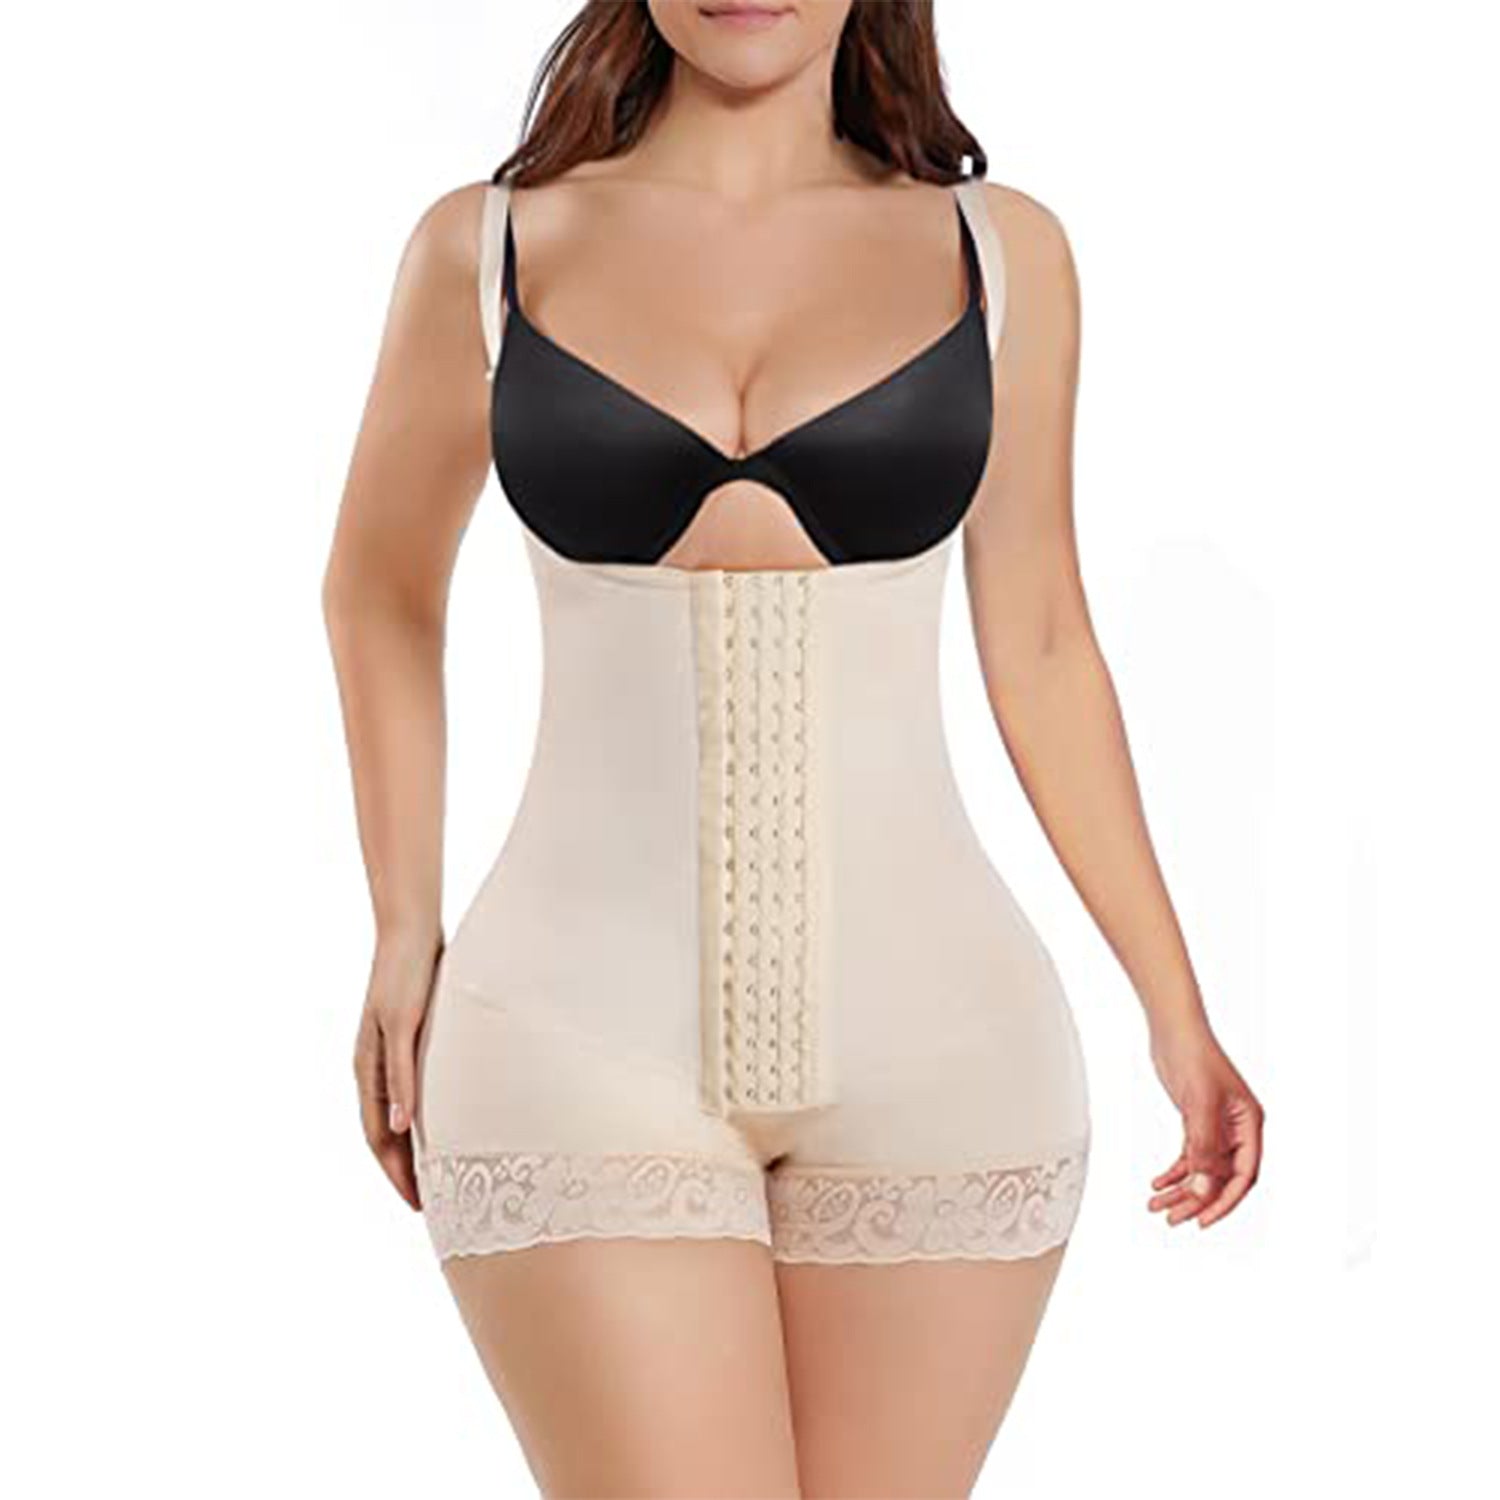 Four-Breasted Tummy Control Body Suit for Sculpted Confidence - HalleBeauty